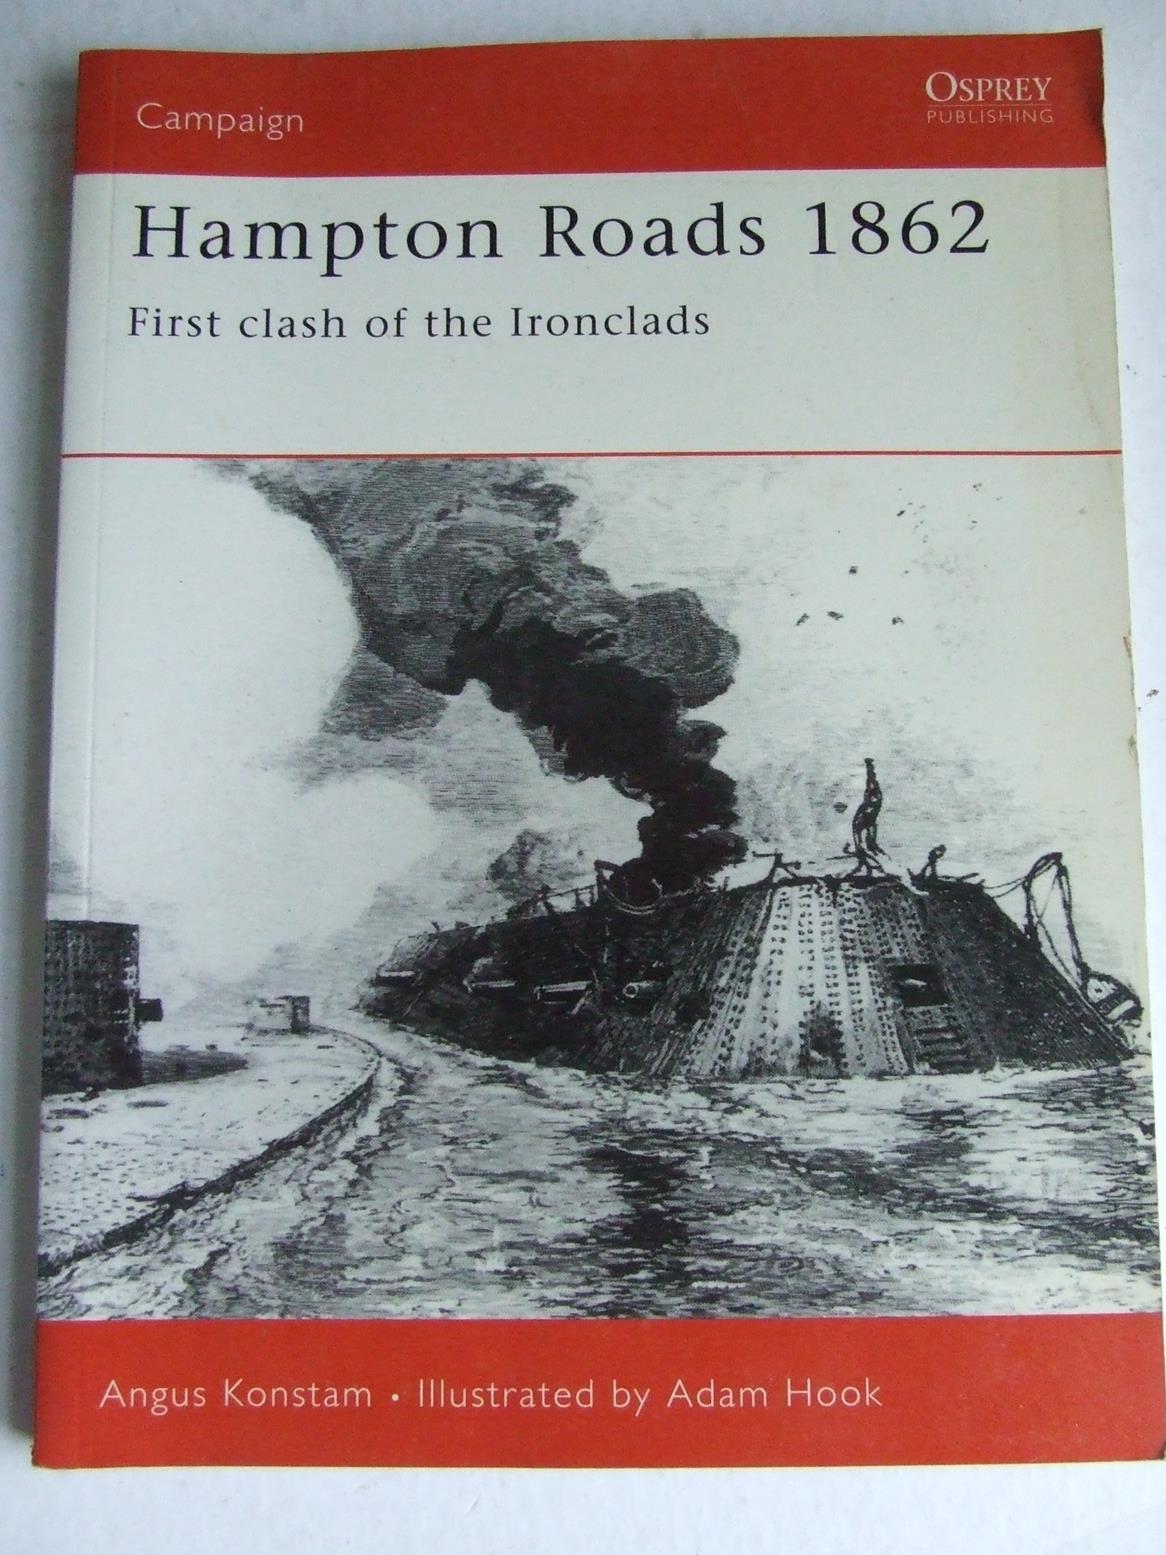 Hampton Roads 1862, first clash of the ironclads.